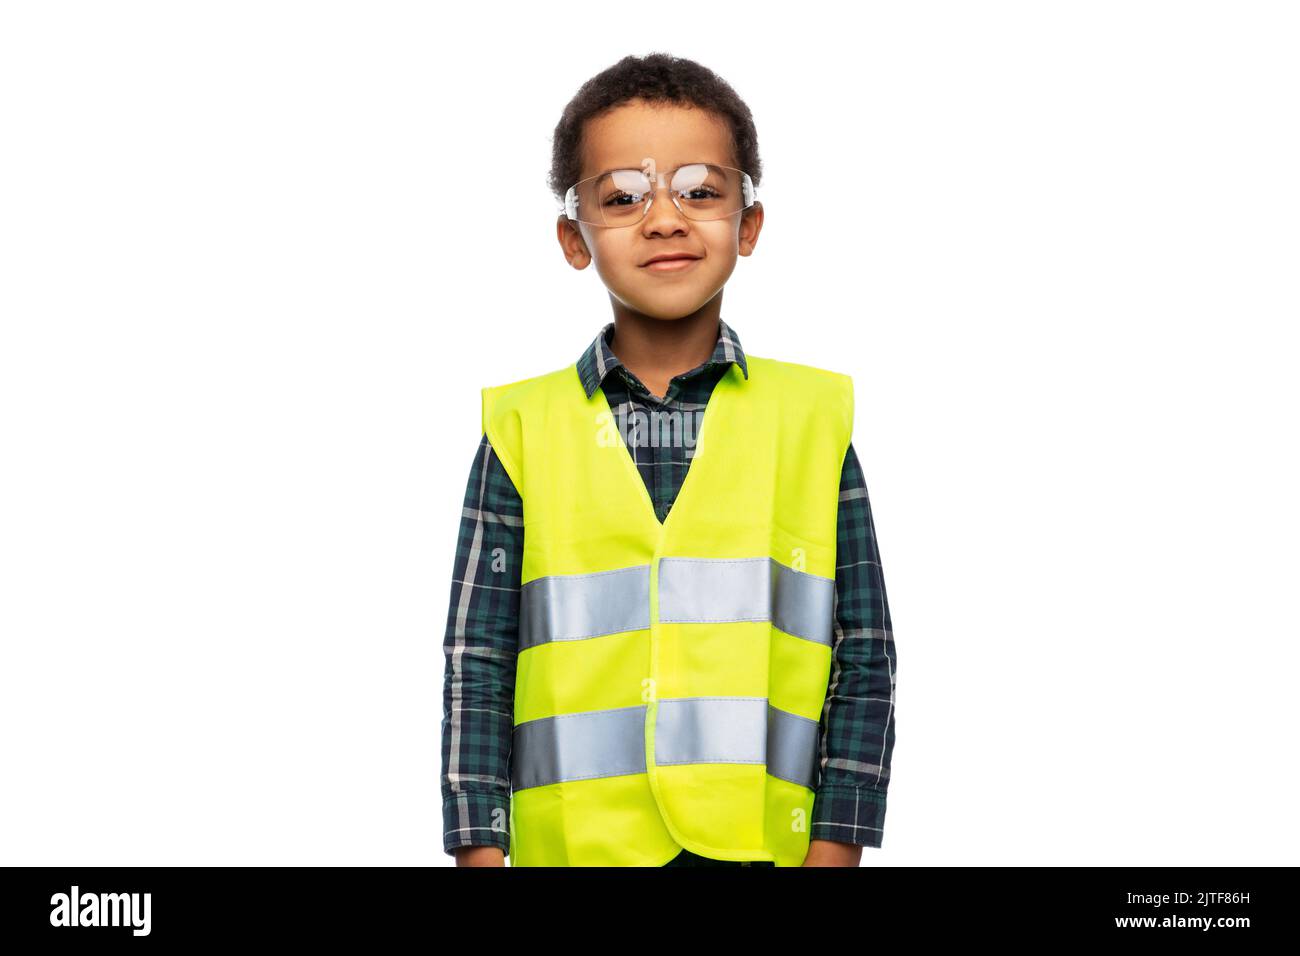 little boy in goggles and safety vest Stock Photo